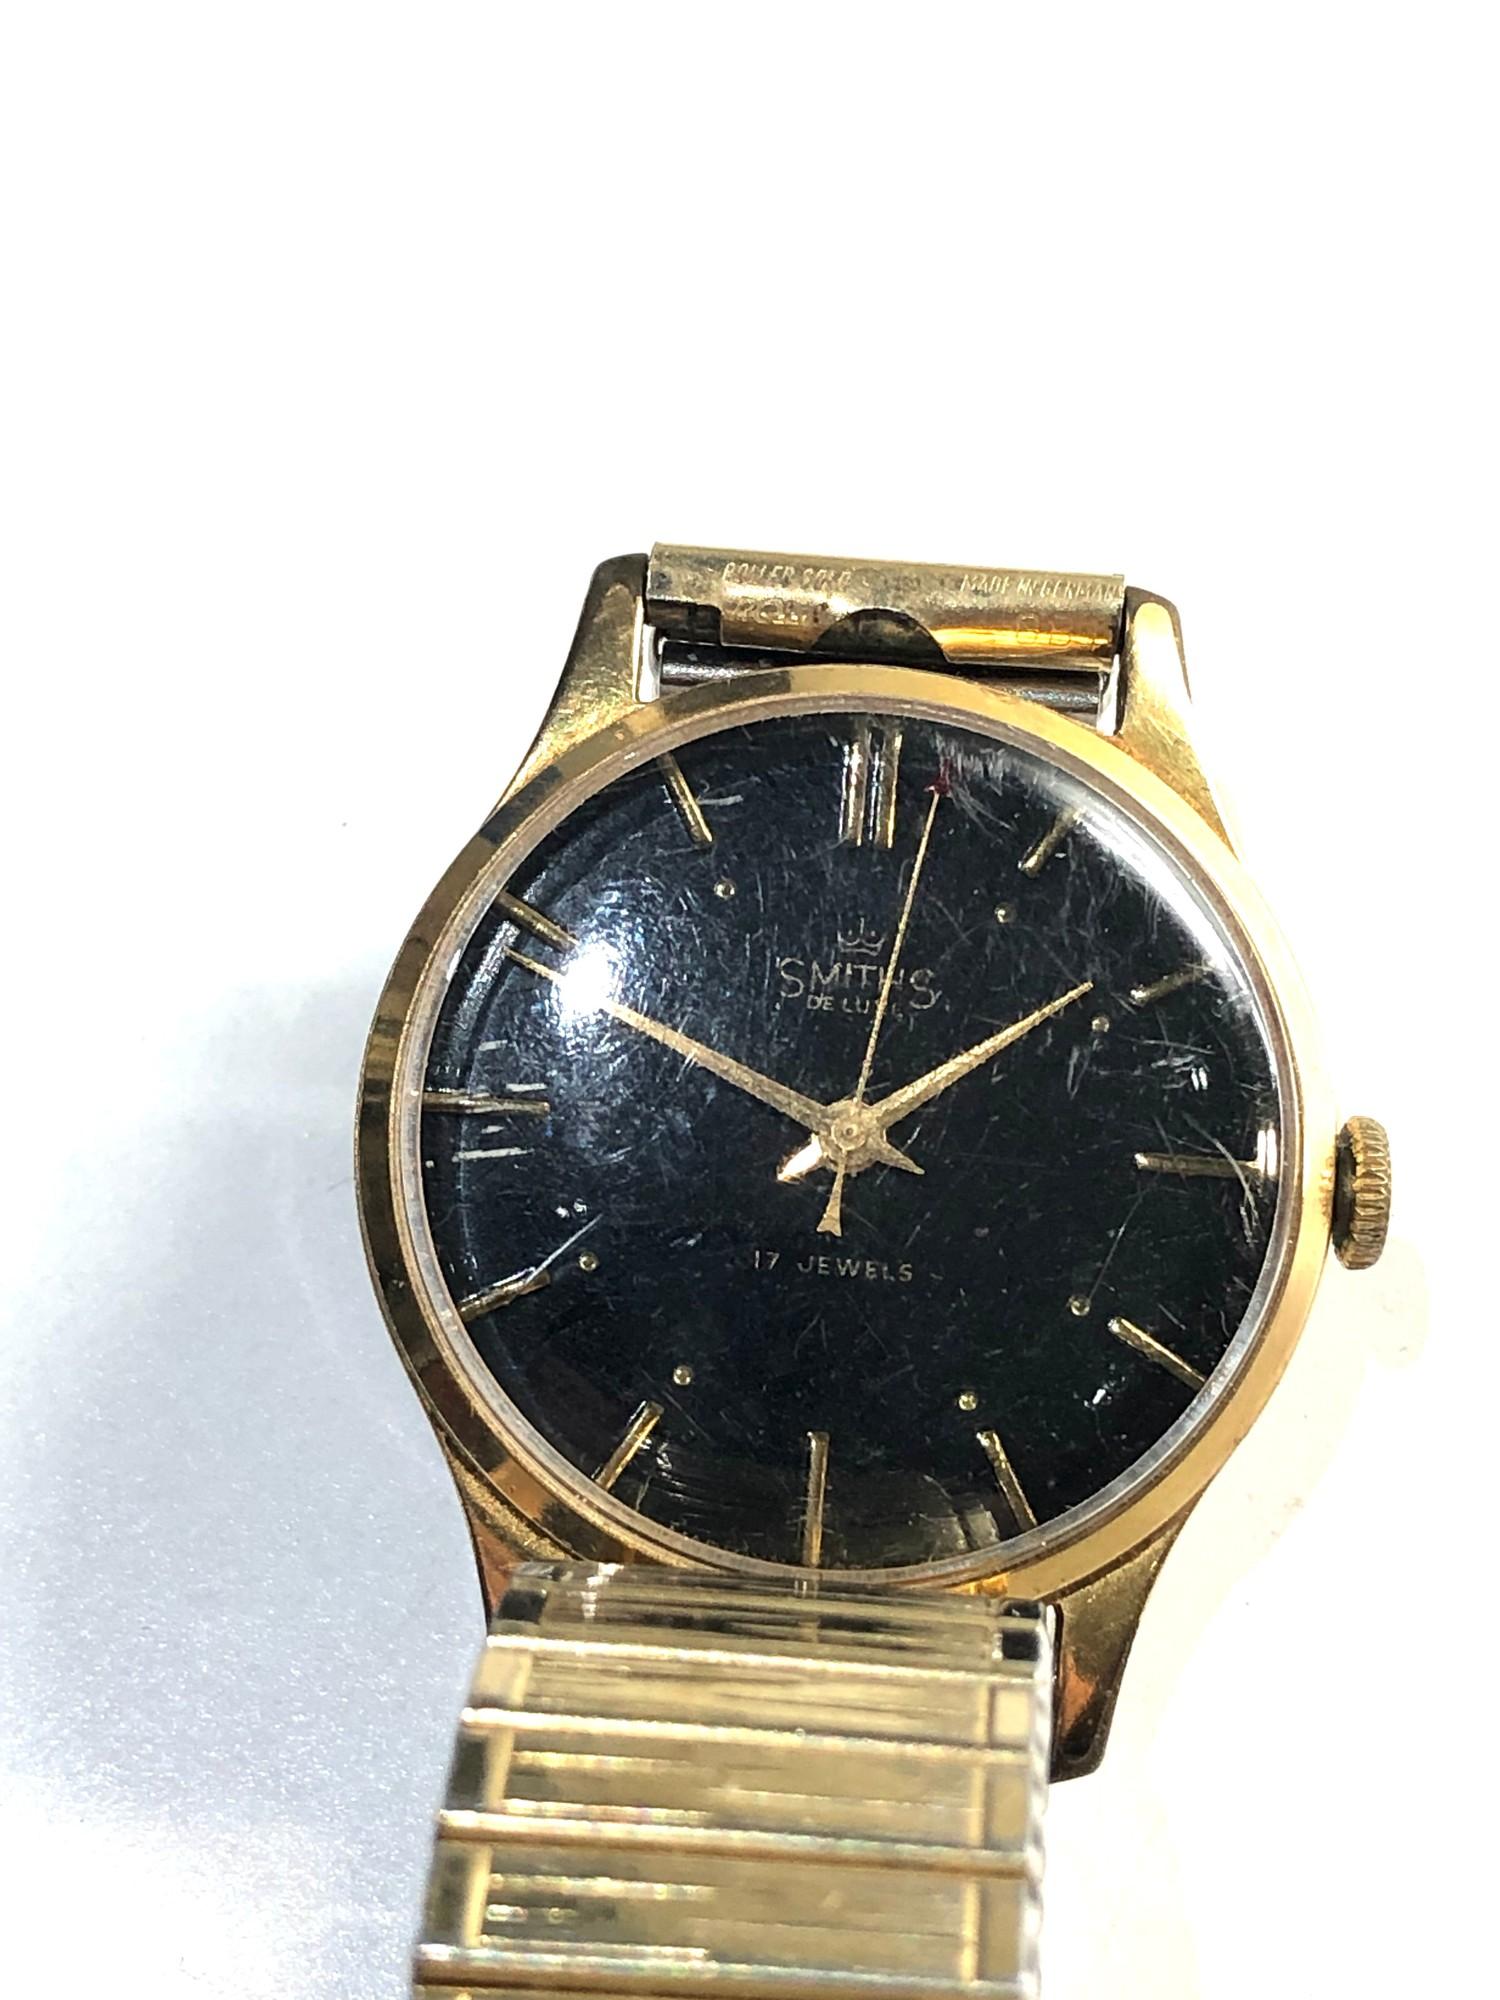 Vintage black dial smiths de luxe 17 jewel gents wrist watch winds and ticks but no warranty given